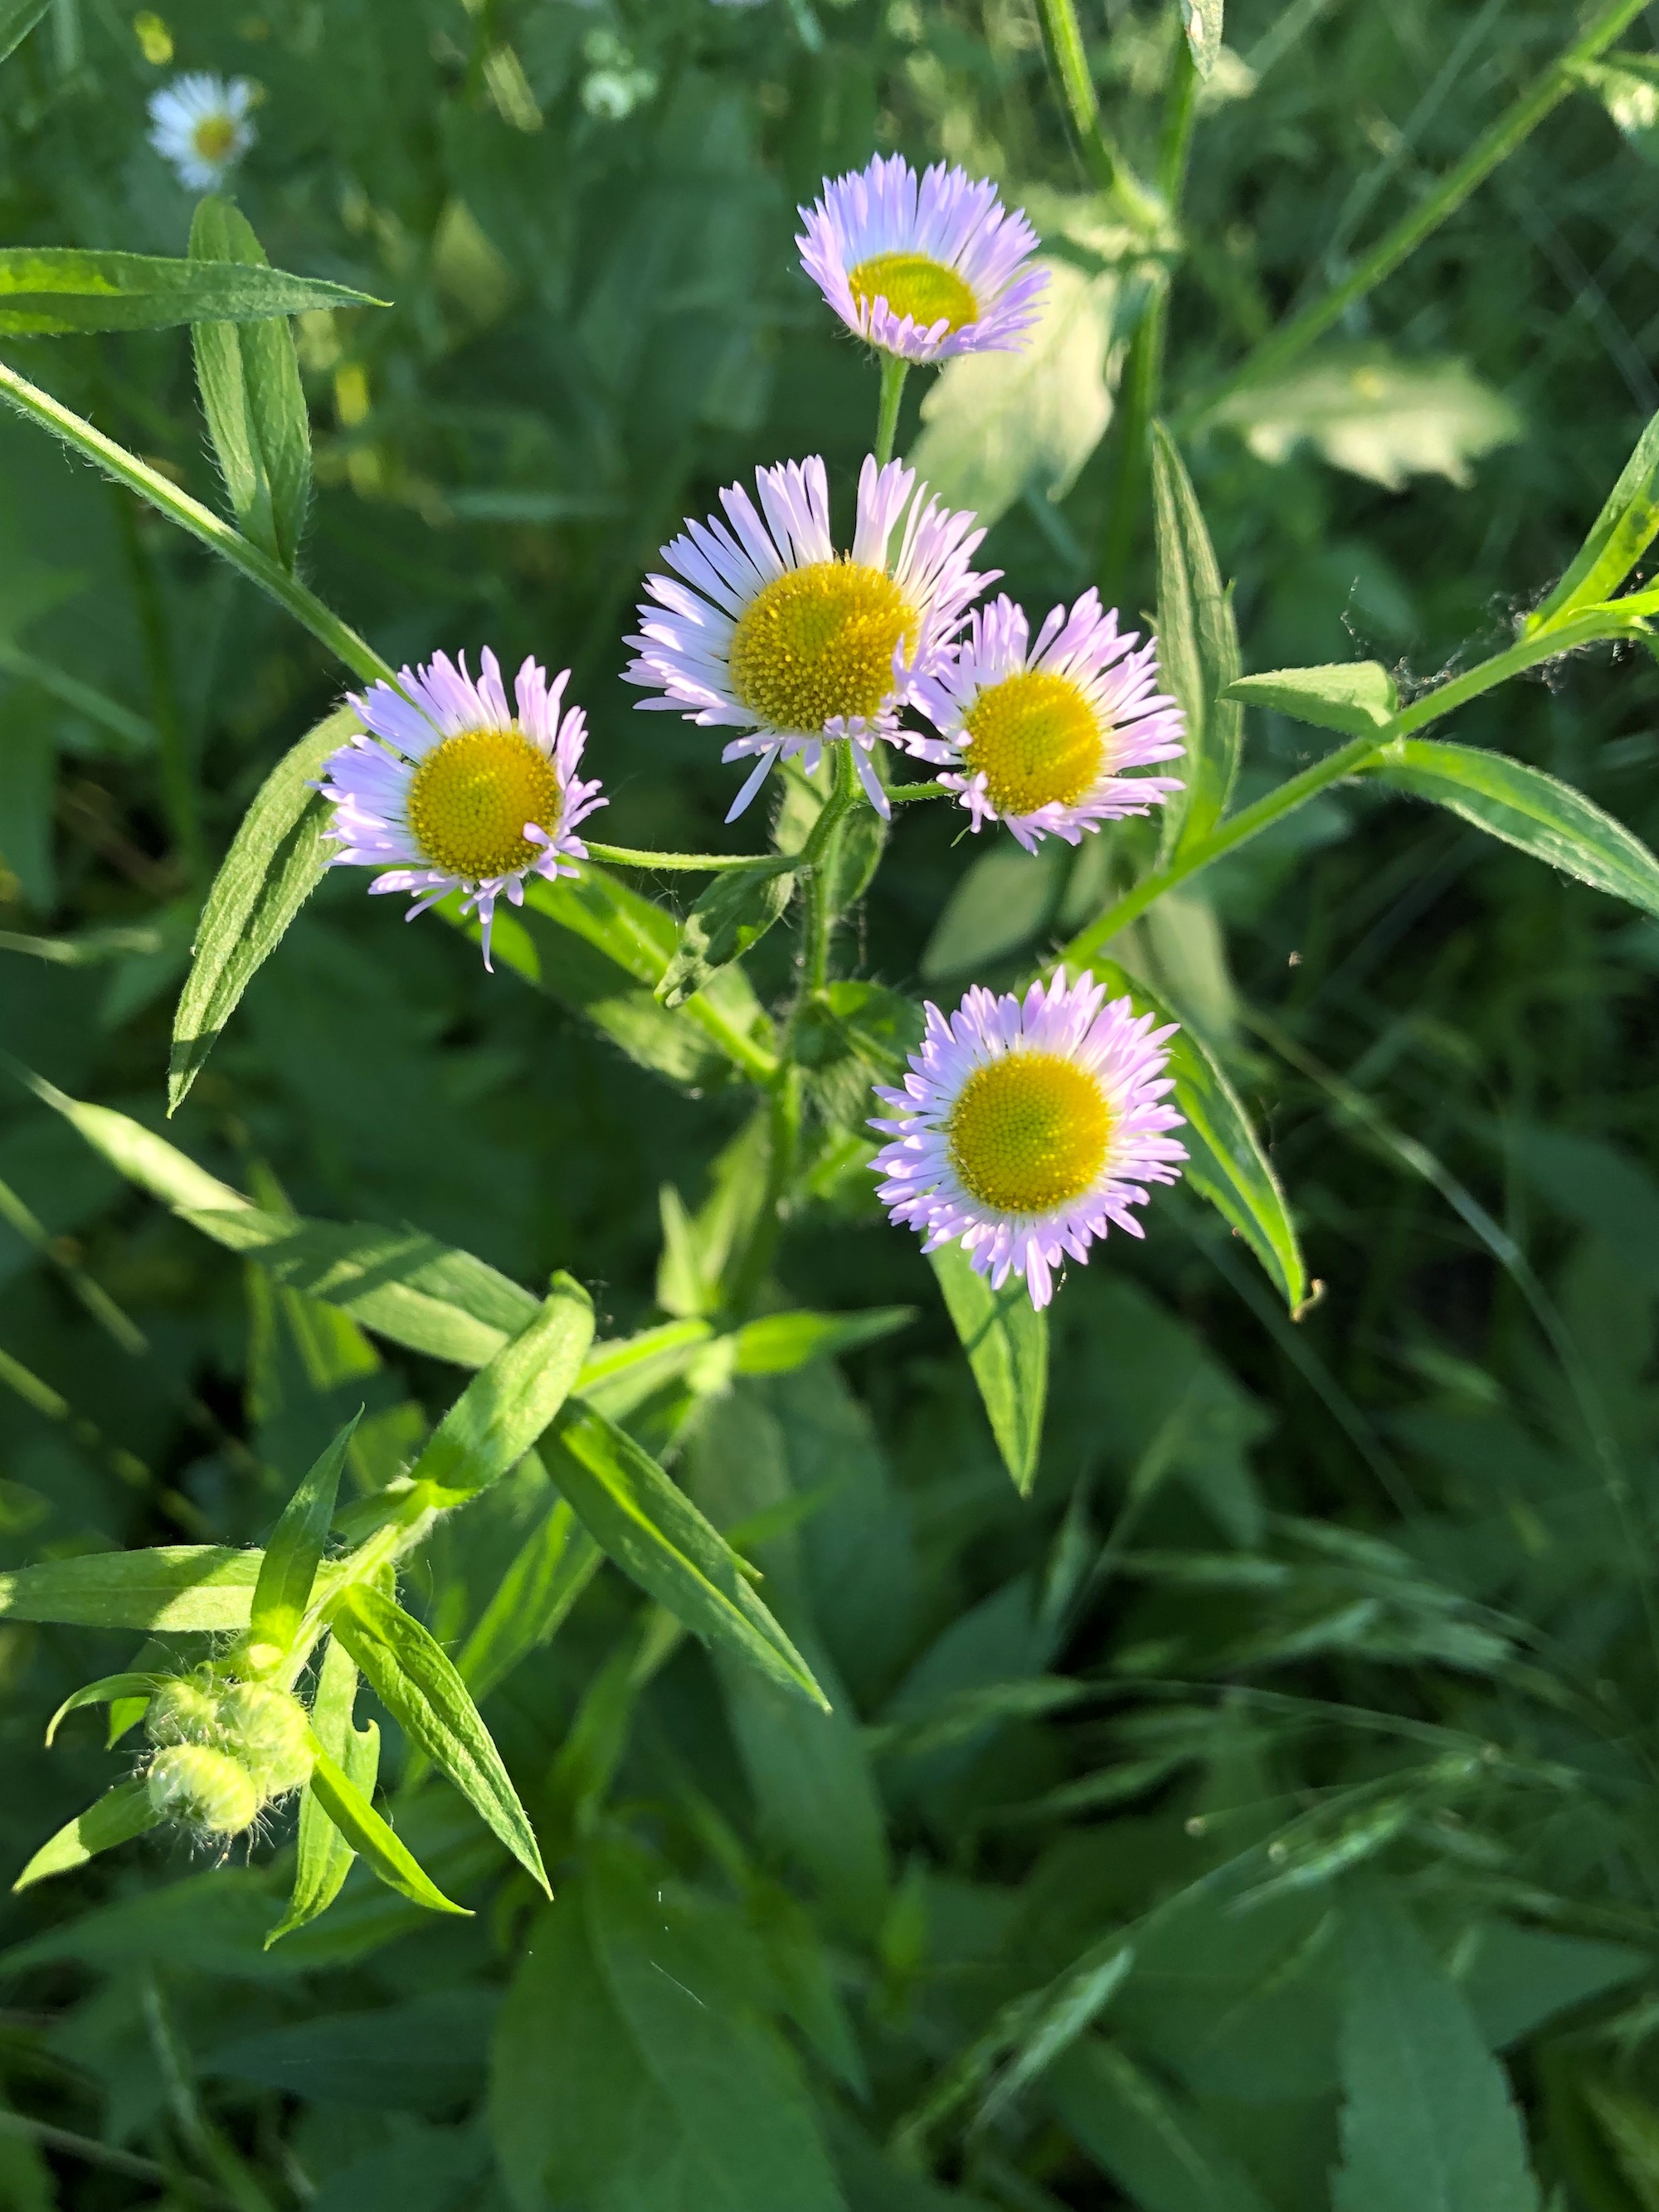 Fleabane in on bank of Marion Dunn Pond in Madison, Wisconsin on June 16, 2020.